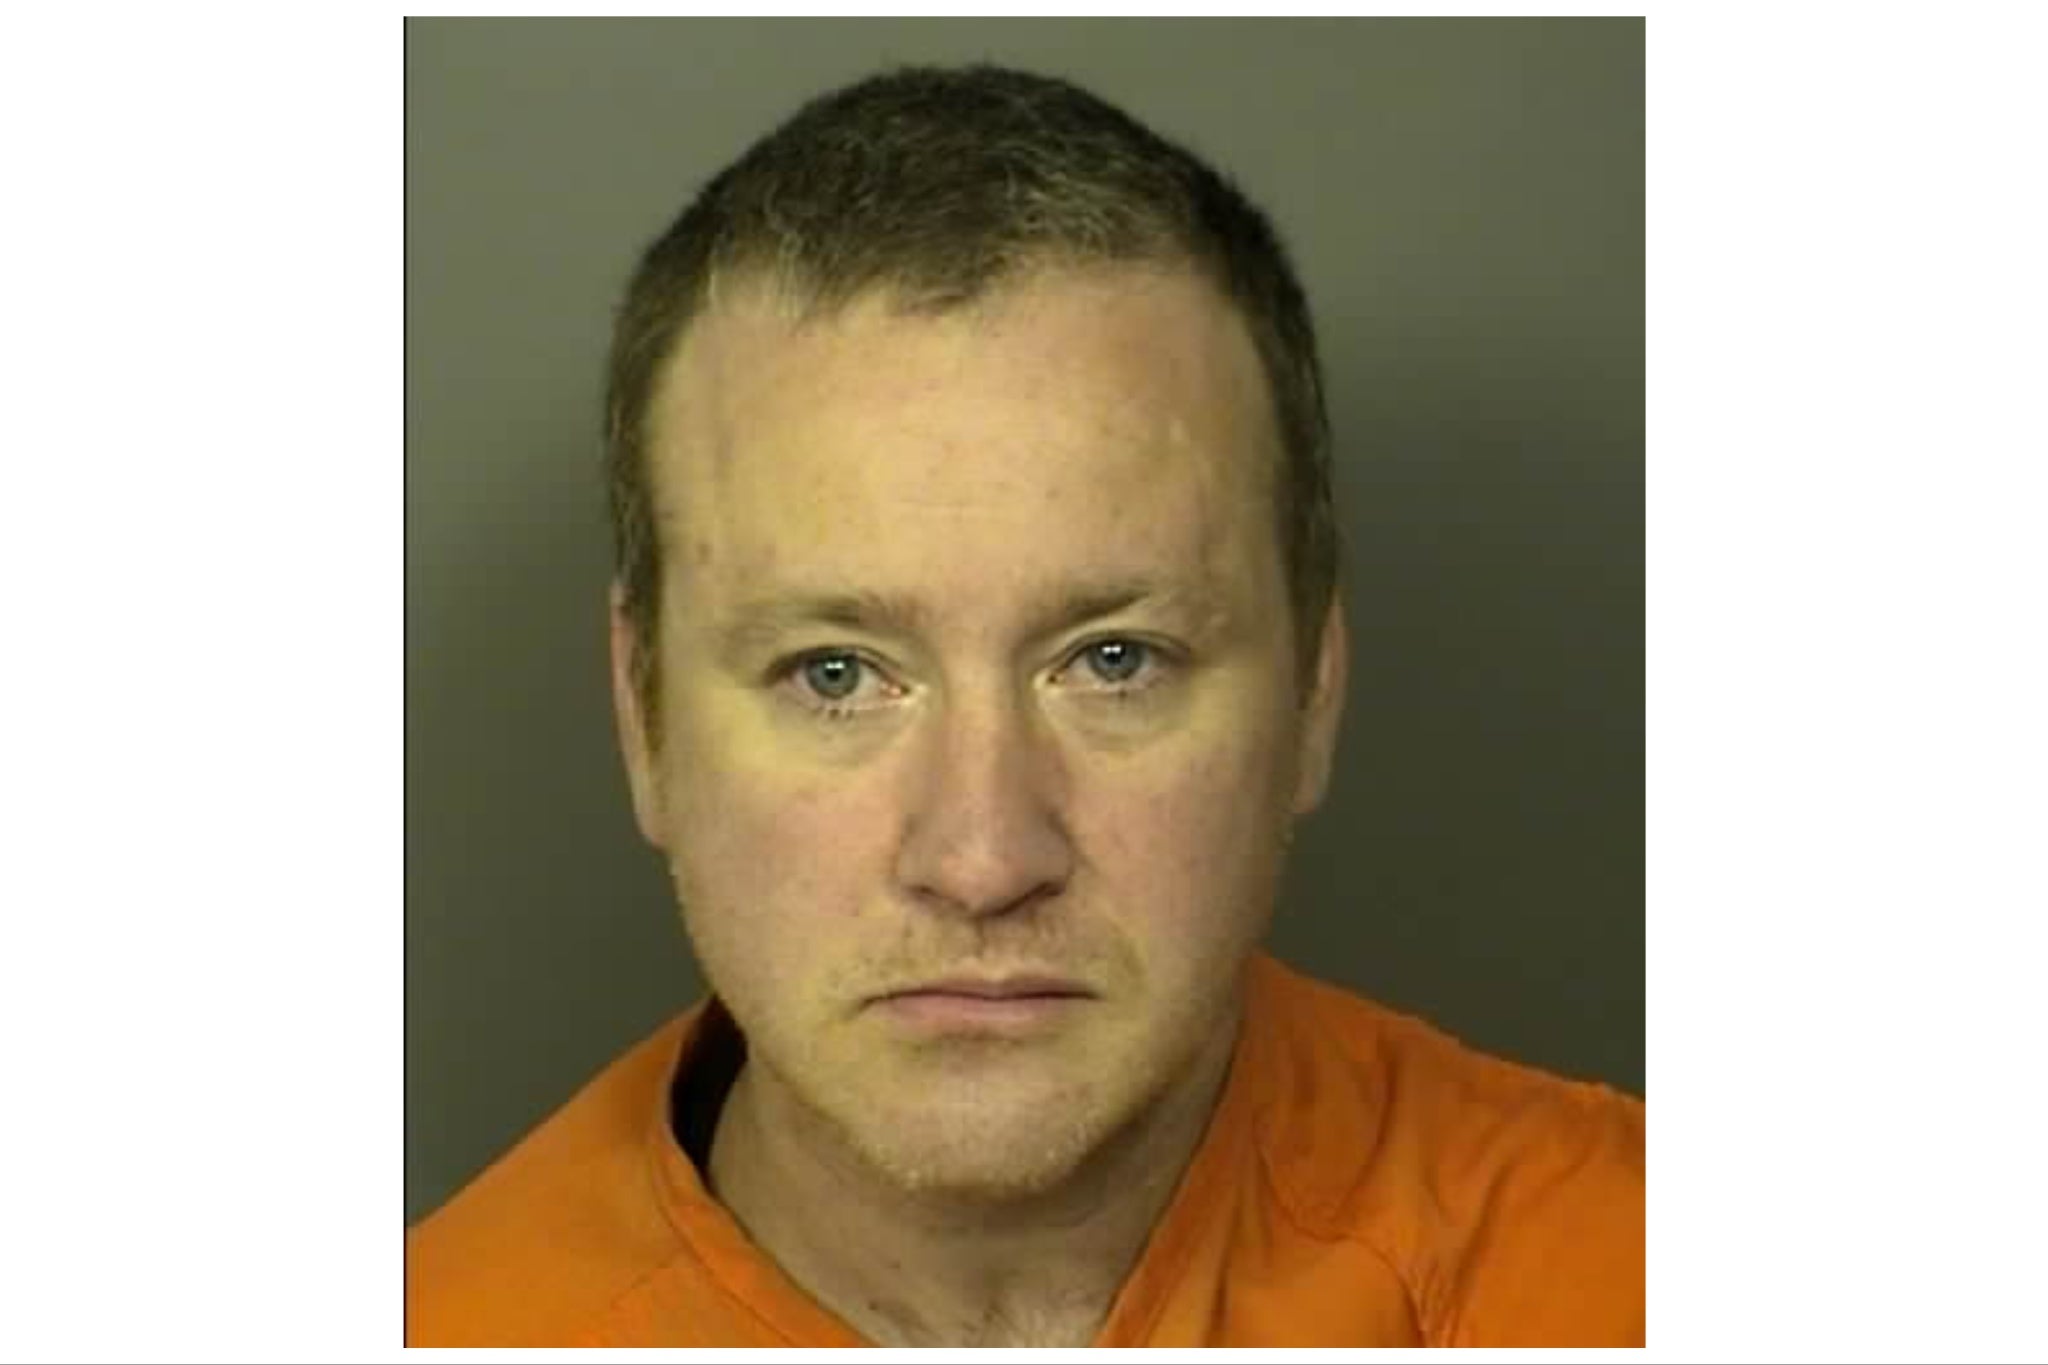 Tom Guiry in a booking photo on June 2 in Horry County, South Carolina